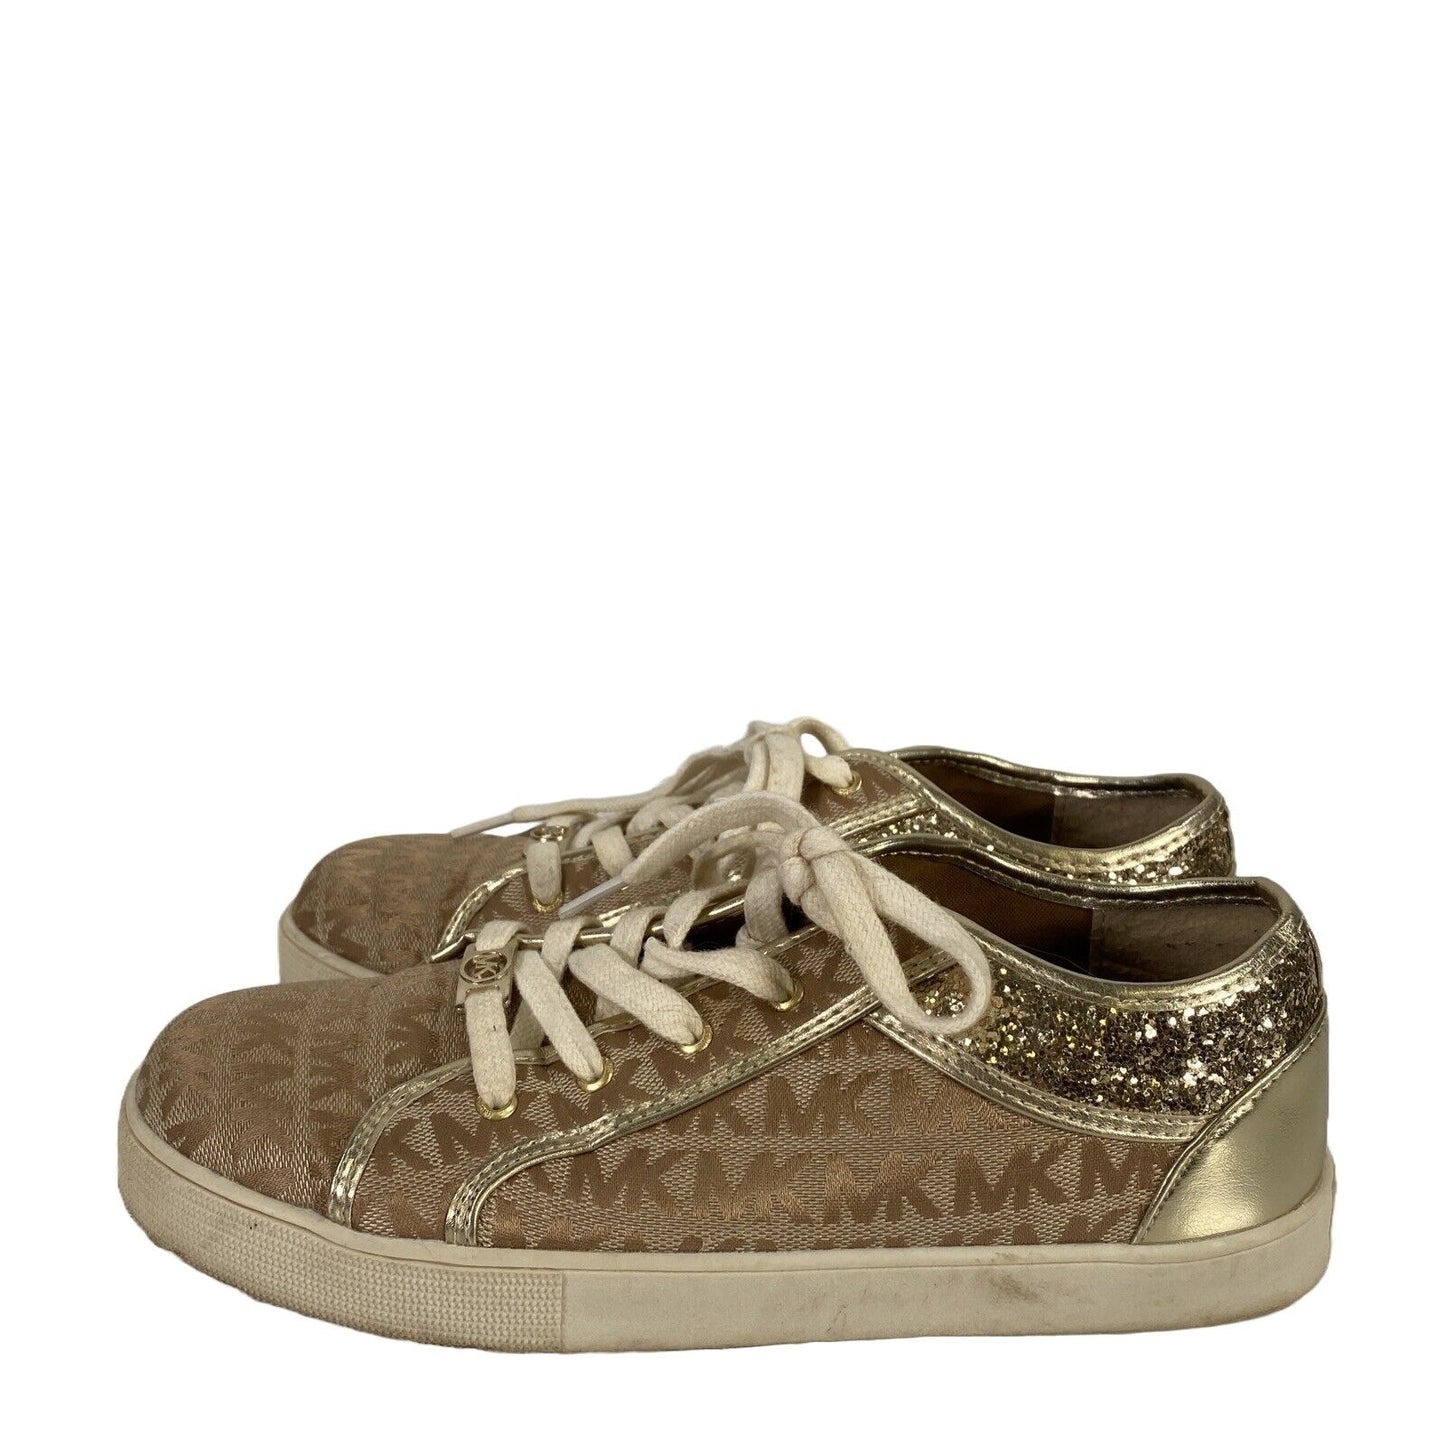 Michael Kors Women's Gold Lace Up Starla Sneakers Shoes - 5